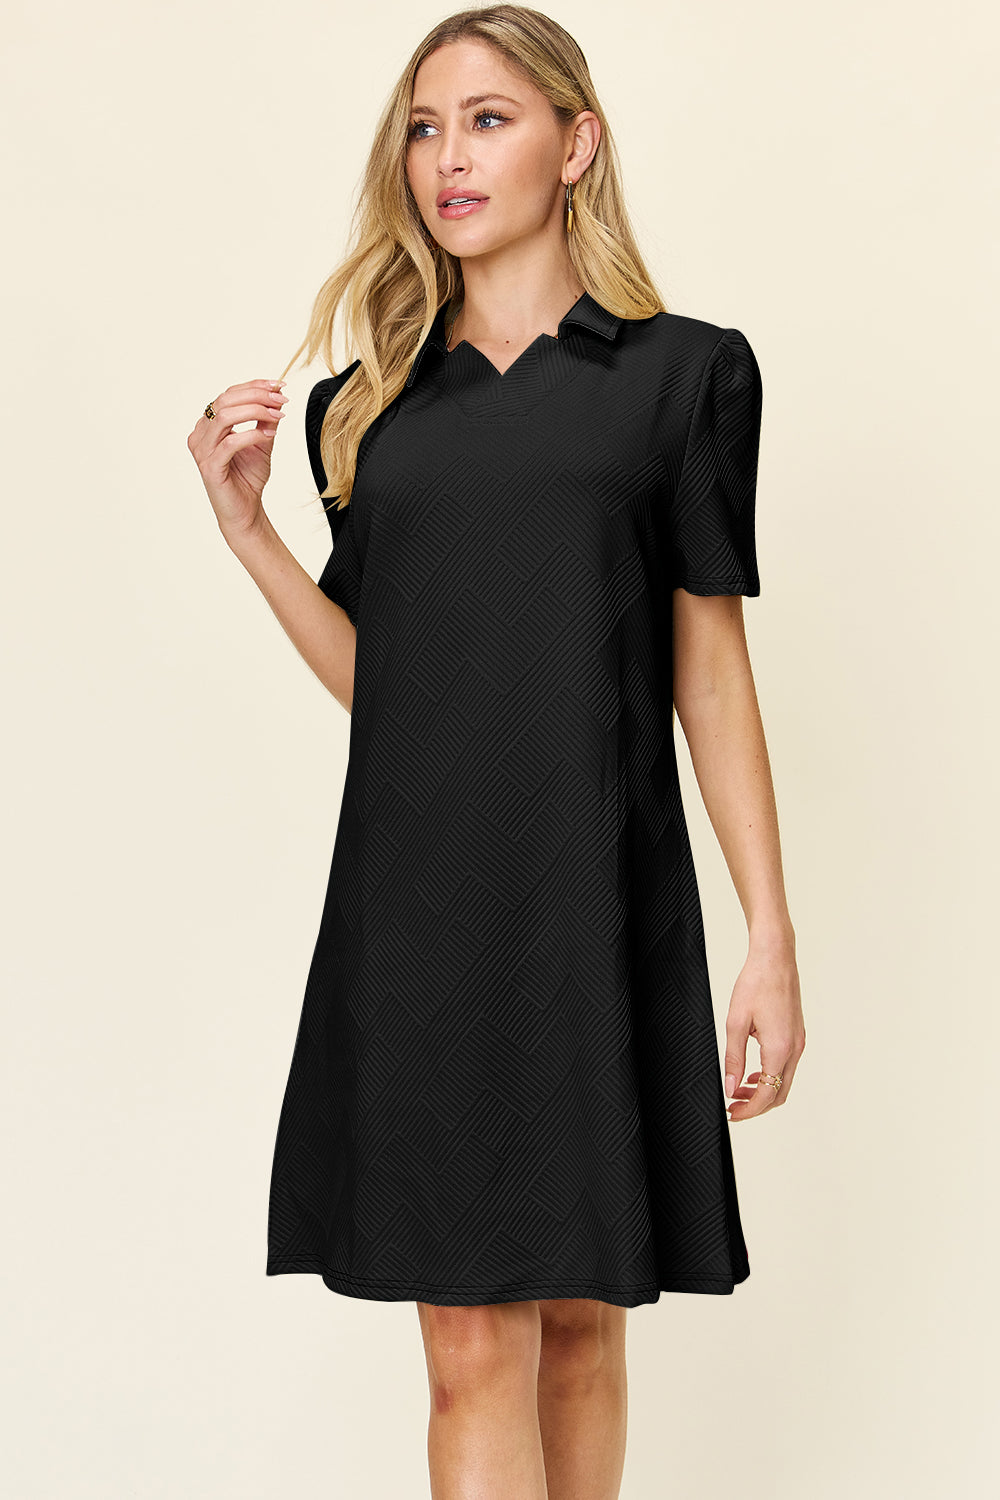 Double Take Full Size Texture Collared Neck Short Sleeve Dress Black